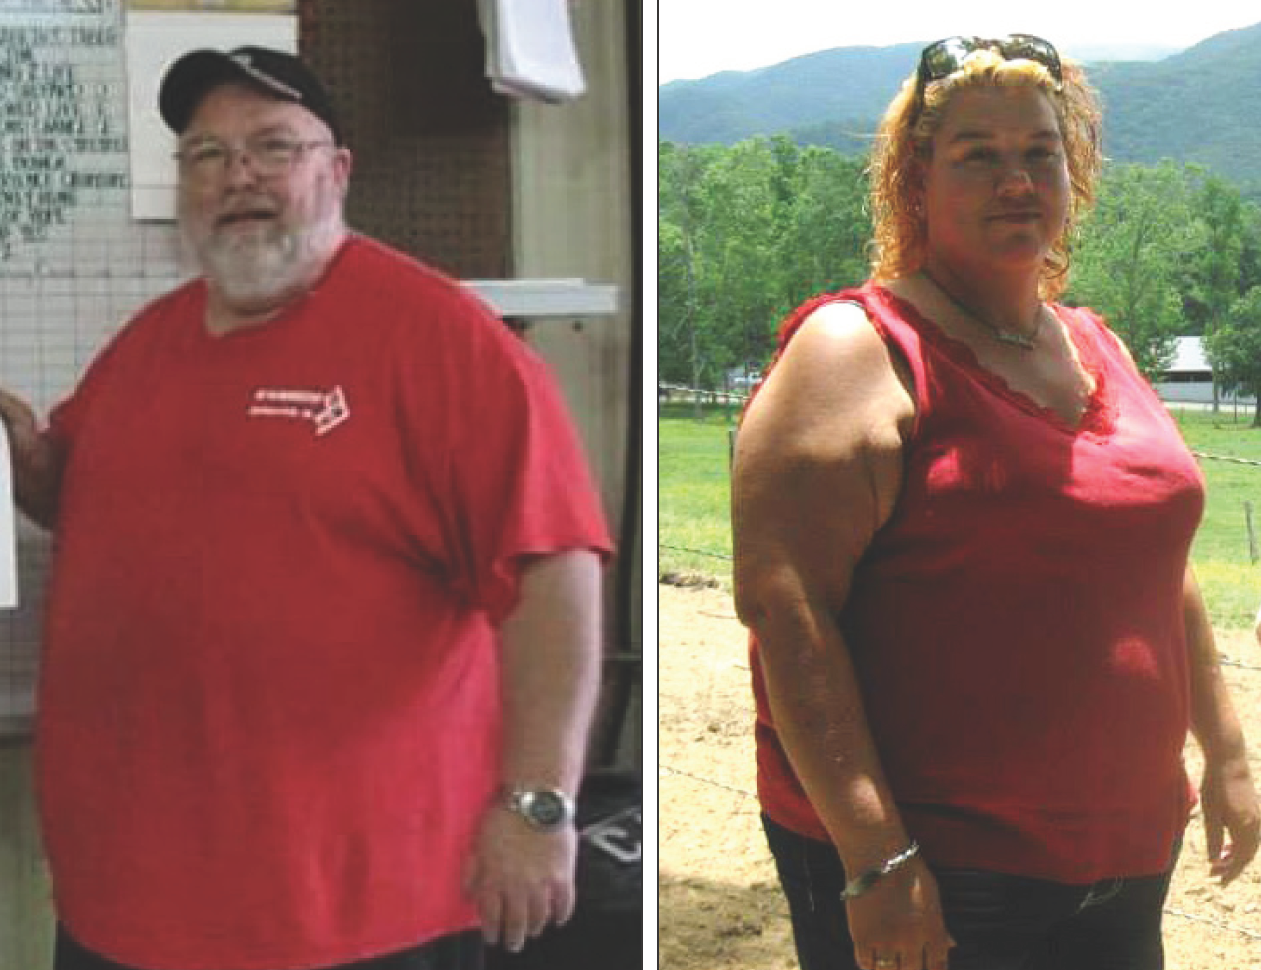 Dwayne and Allenna Lingers before bariatric surgery